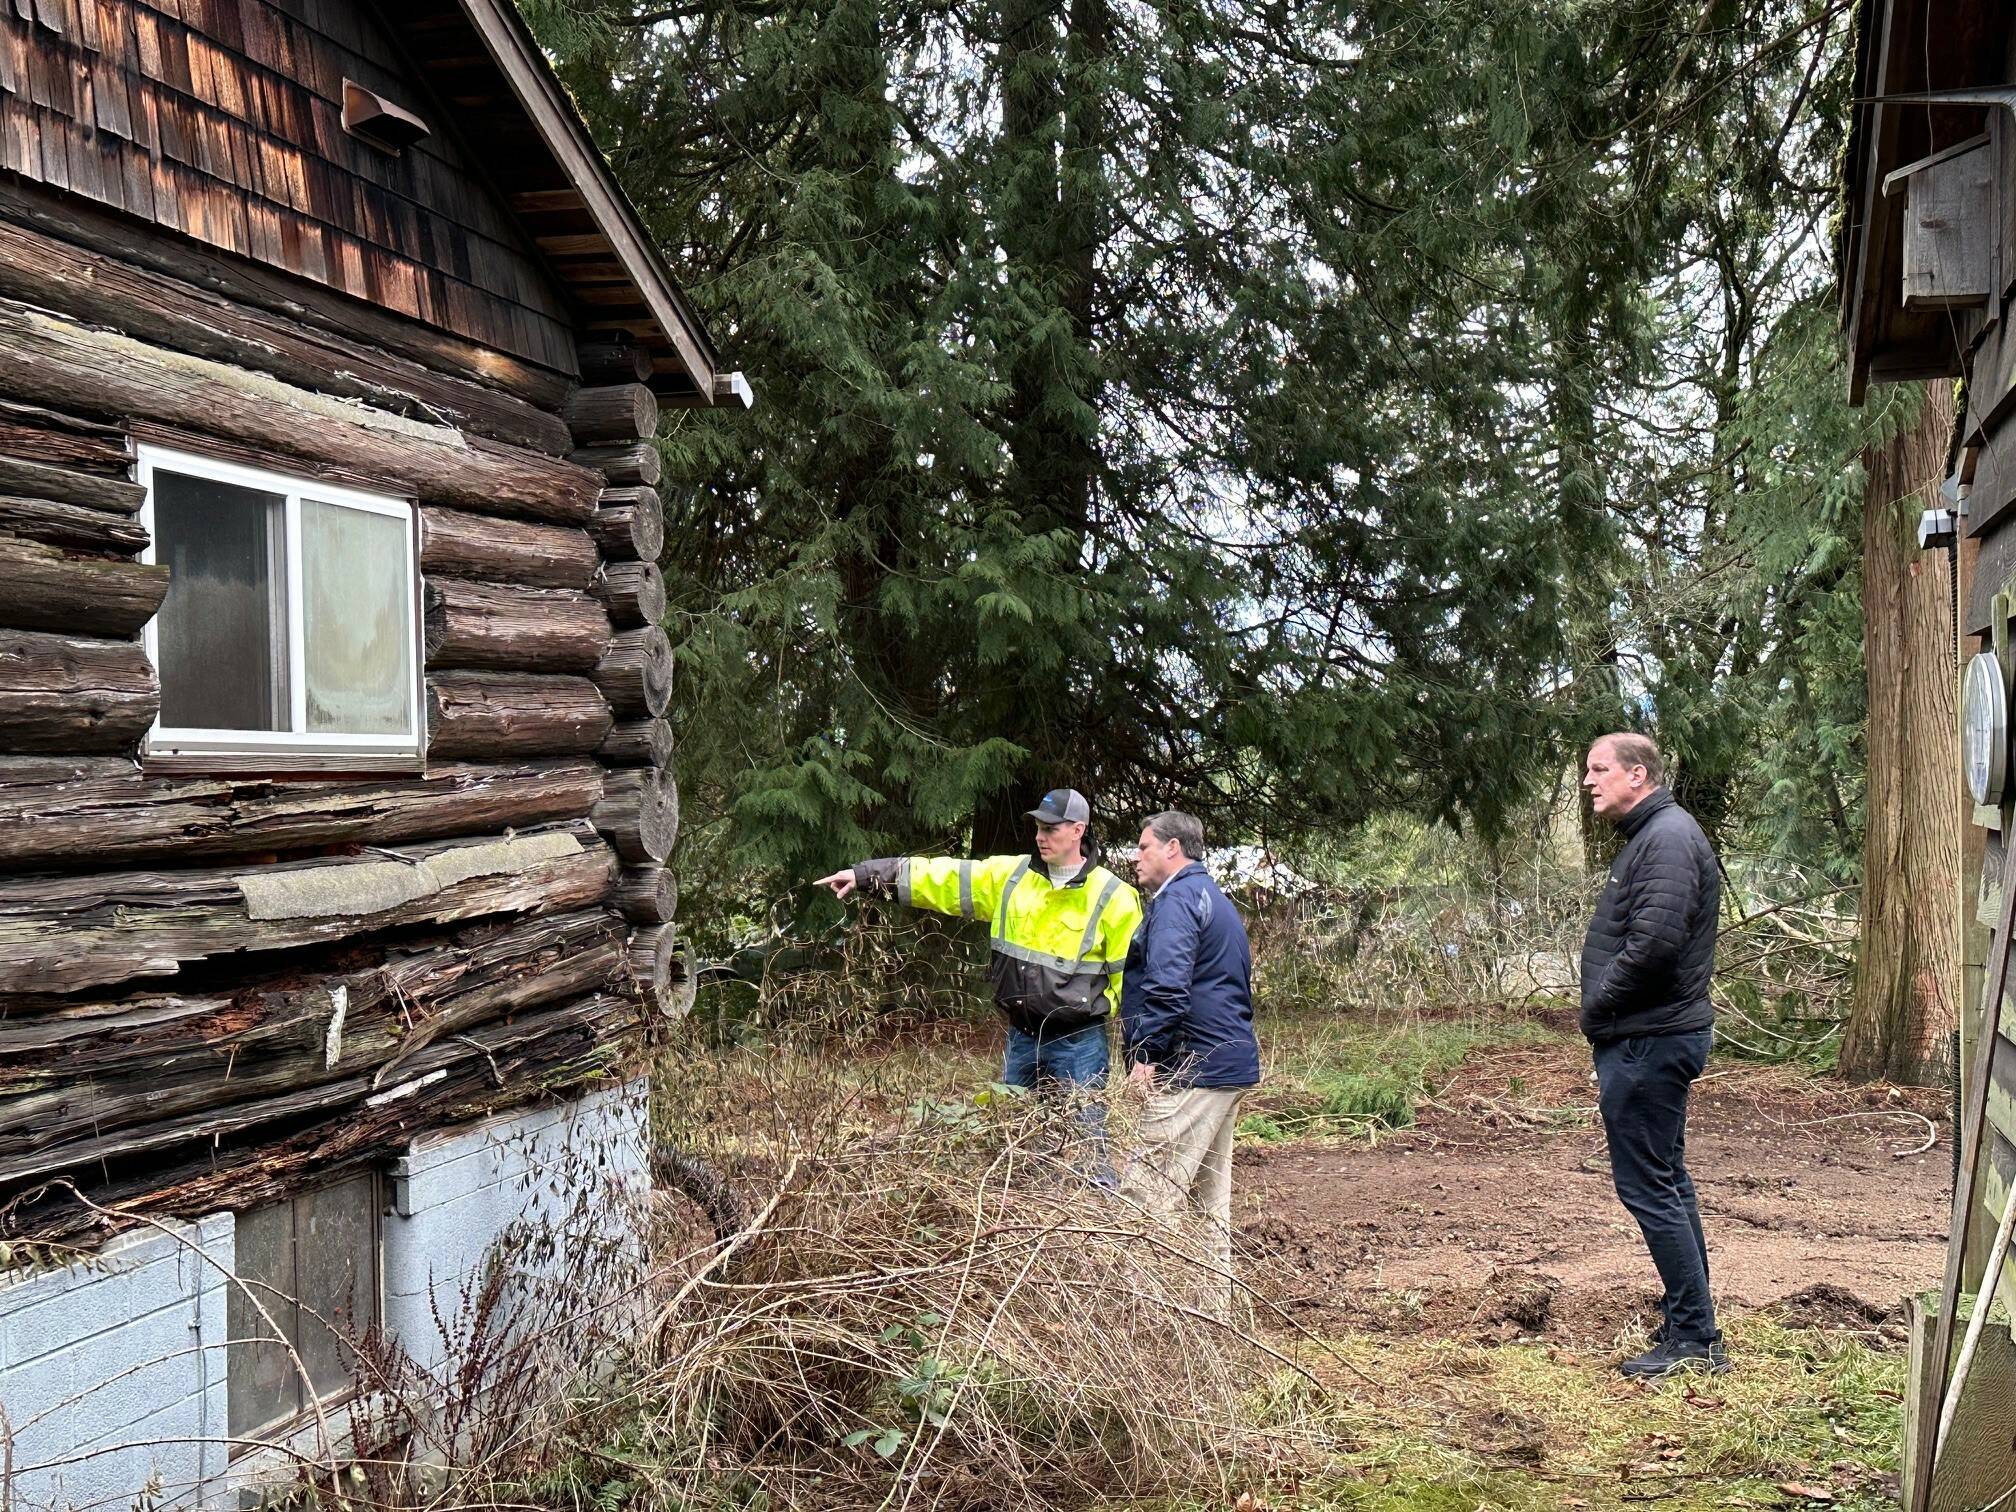 Photo provided by the City of Federal Way
EJ Walsh, Brian Davis and Mayor Ferrell visit the cabins to evaluate their condition and historic value.